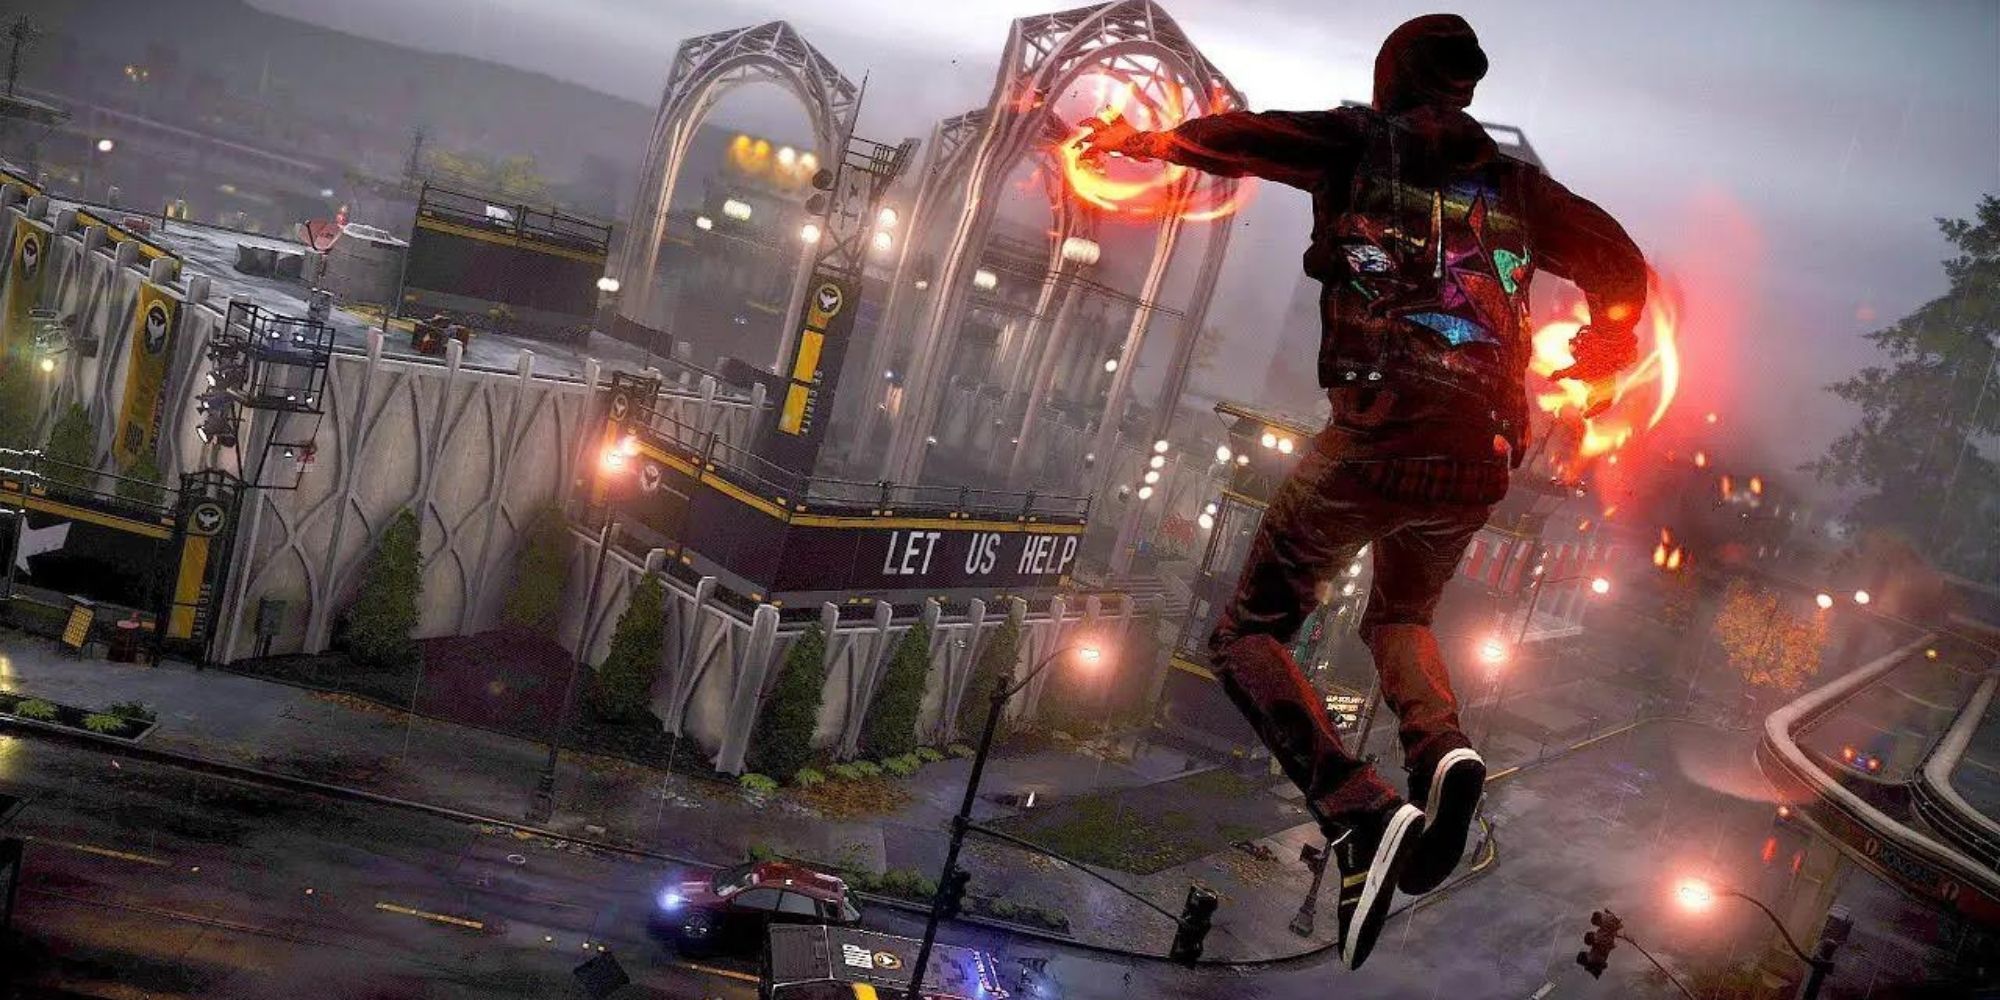 Infamous Delson Rowe Flies Over the City with his Superpowers Charged